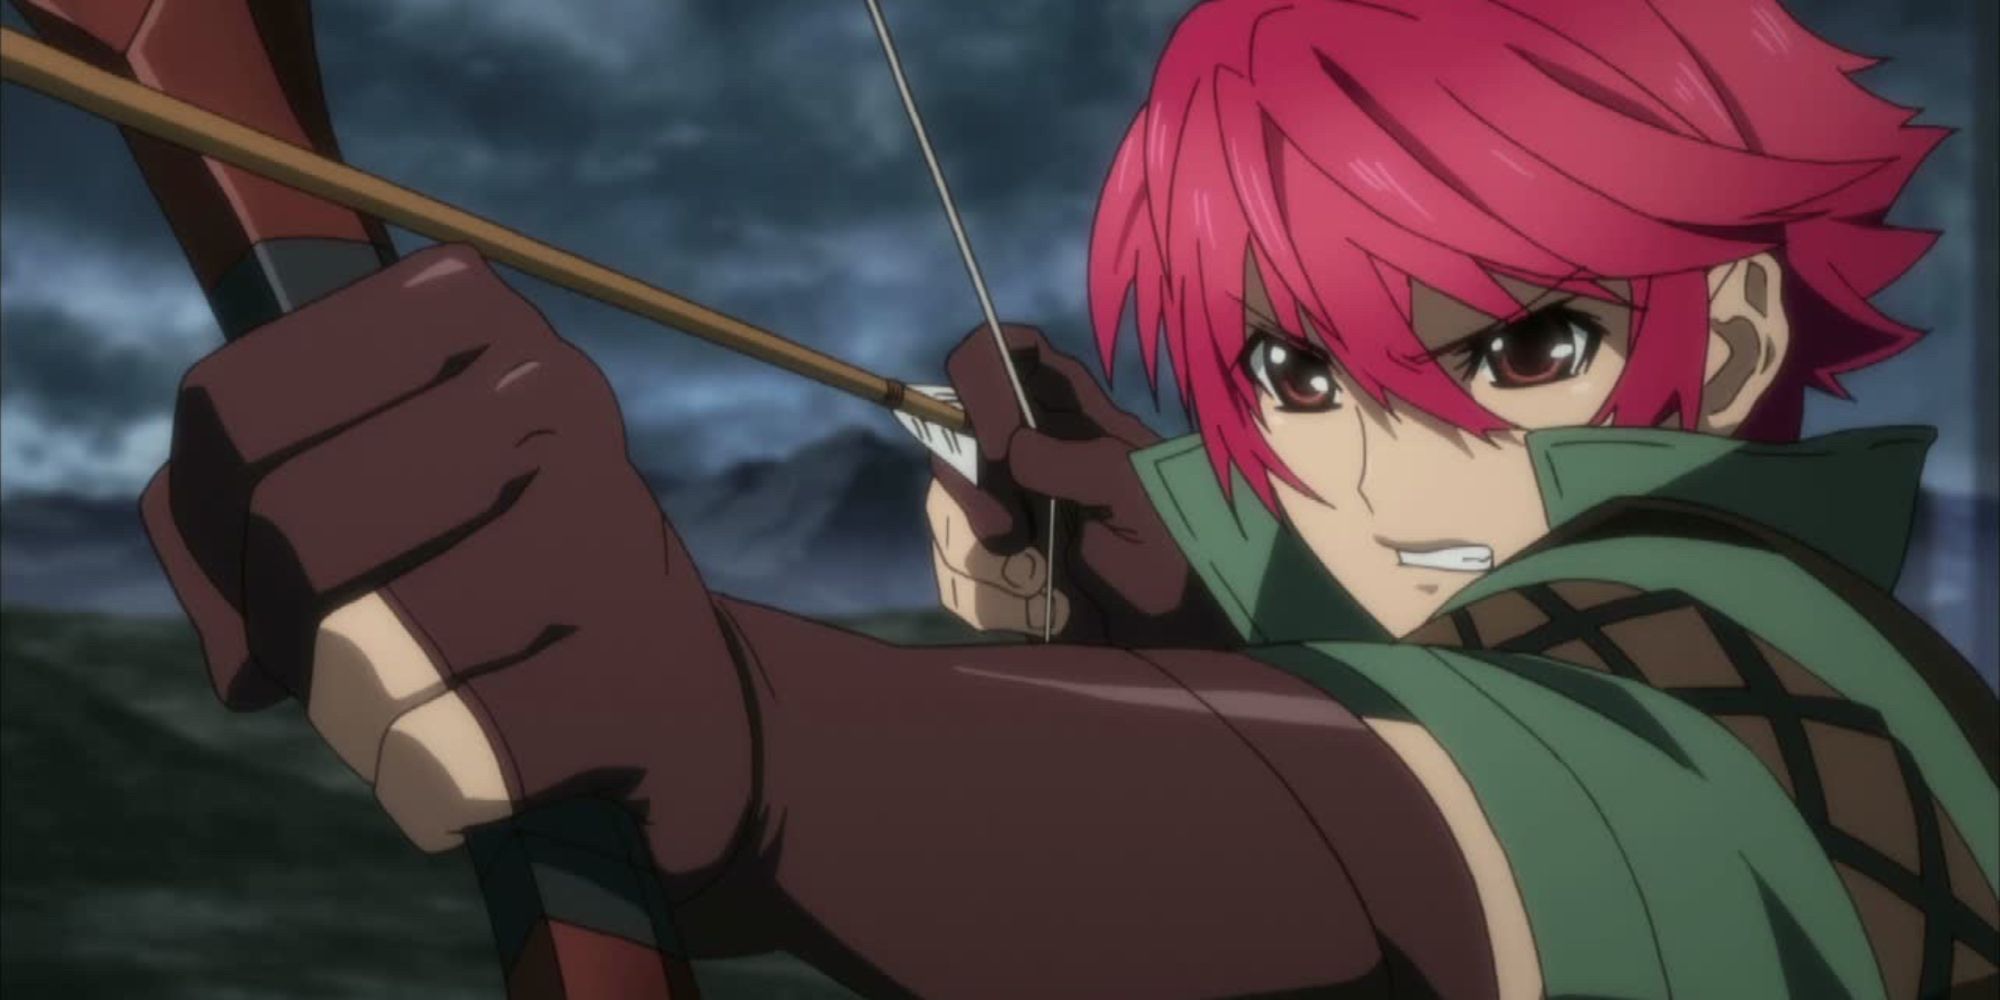 Fate/stay night Green Arrow Anime Female Archery, archer, manga, fictional  Character png | PNGEgg